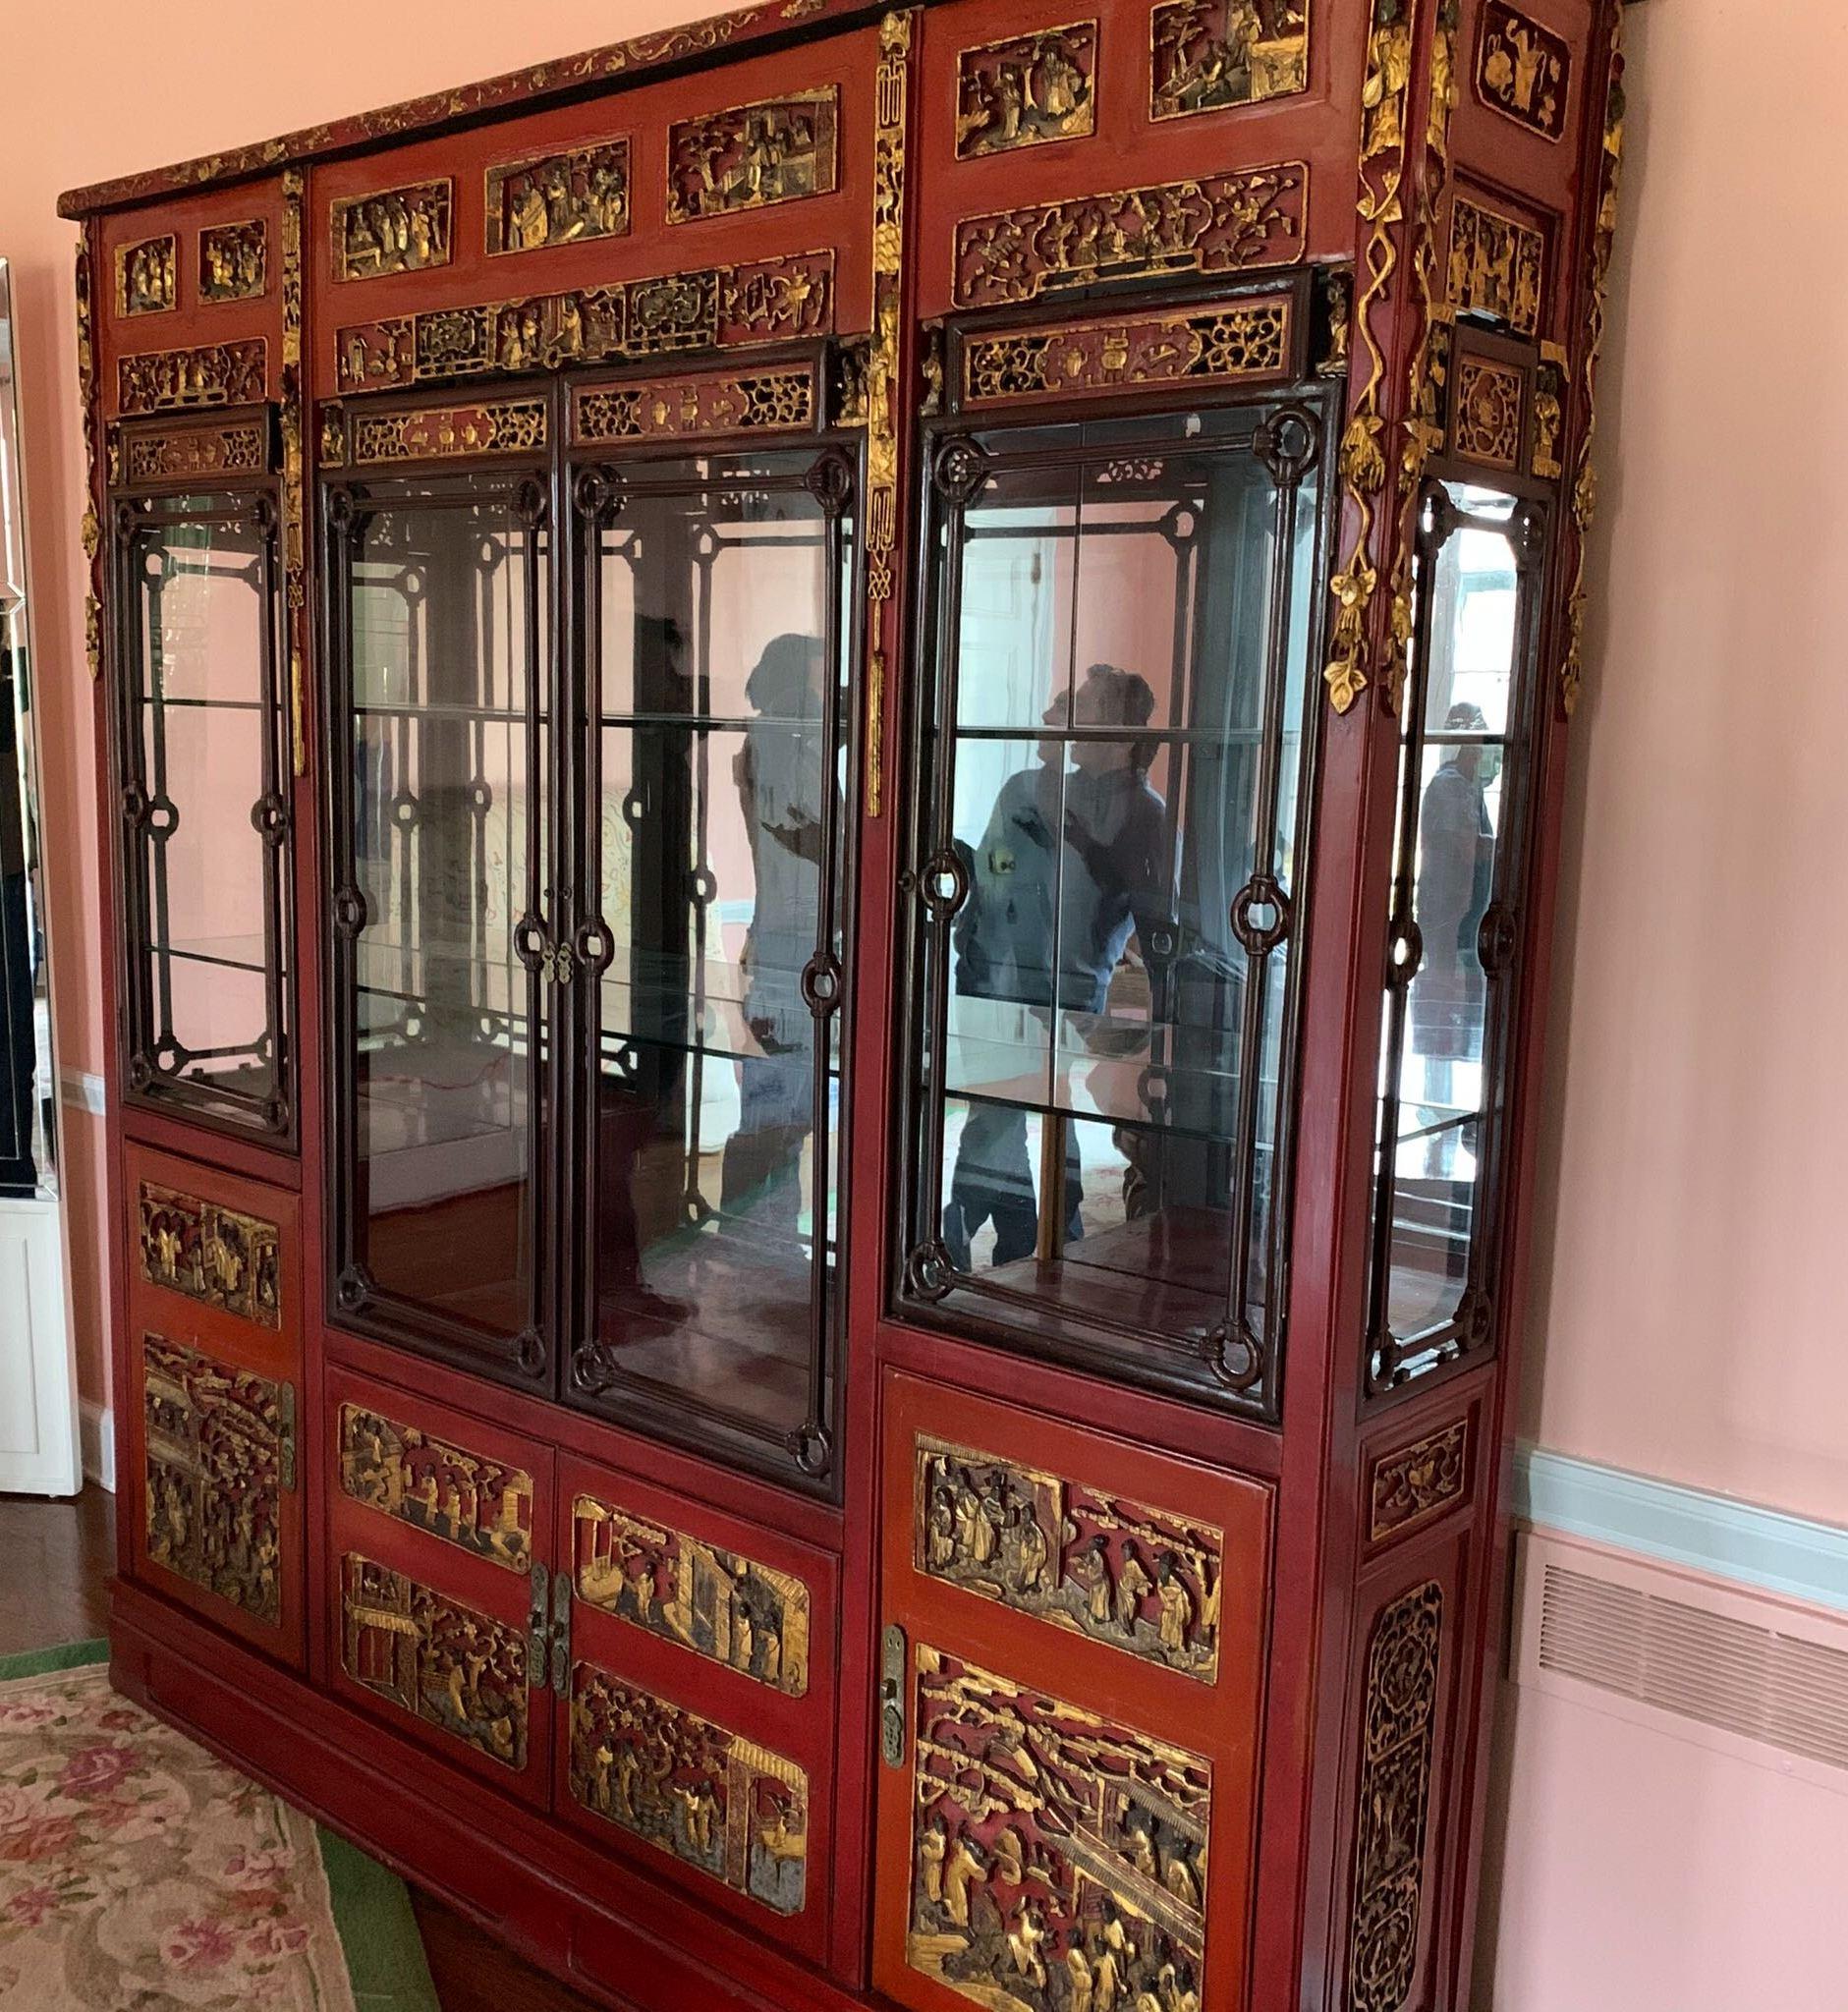 Chinese breakfront cabinet in carved and partially giltwood with lacquered finish and mirrored back. The piece has four inset glass doors which open to three-glass shelves on the interior, over a four-door cabinet base with two-shelf interior. In